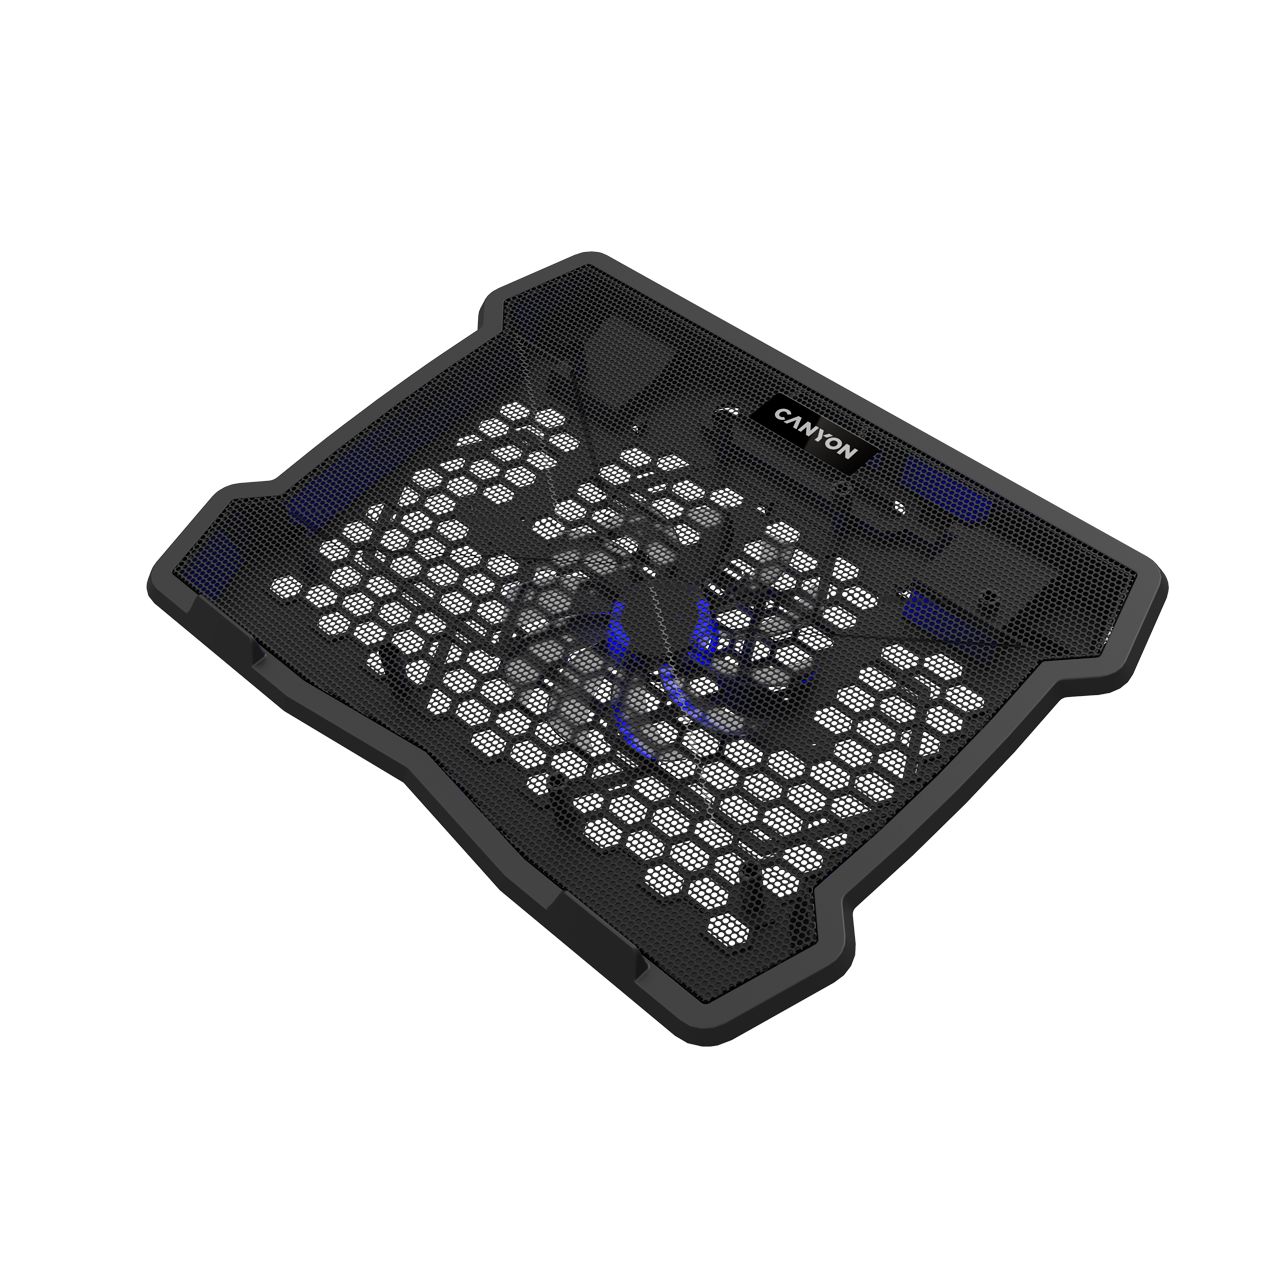 CANYON Cooling stand single fan with 2x2.0 USB hub, support up to 10”-15.6” laptop, ABS plastic and iron, Fans dimension:125*125*15mm(1pc), DC 5V, fan speed: 800-1000RPM, size:340*265*30mm, 406g_1